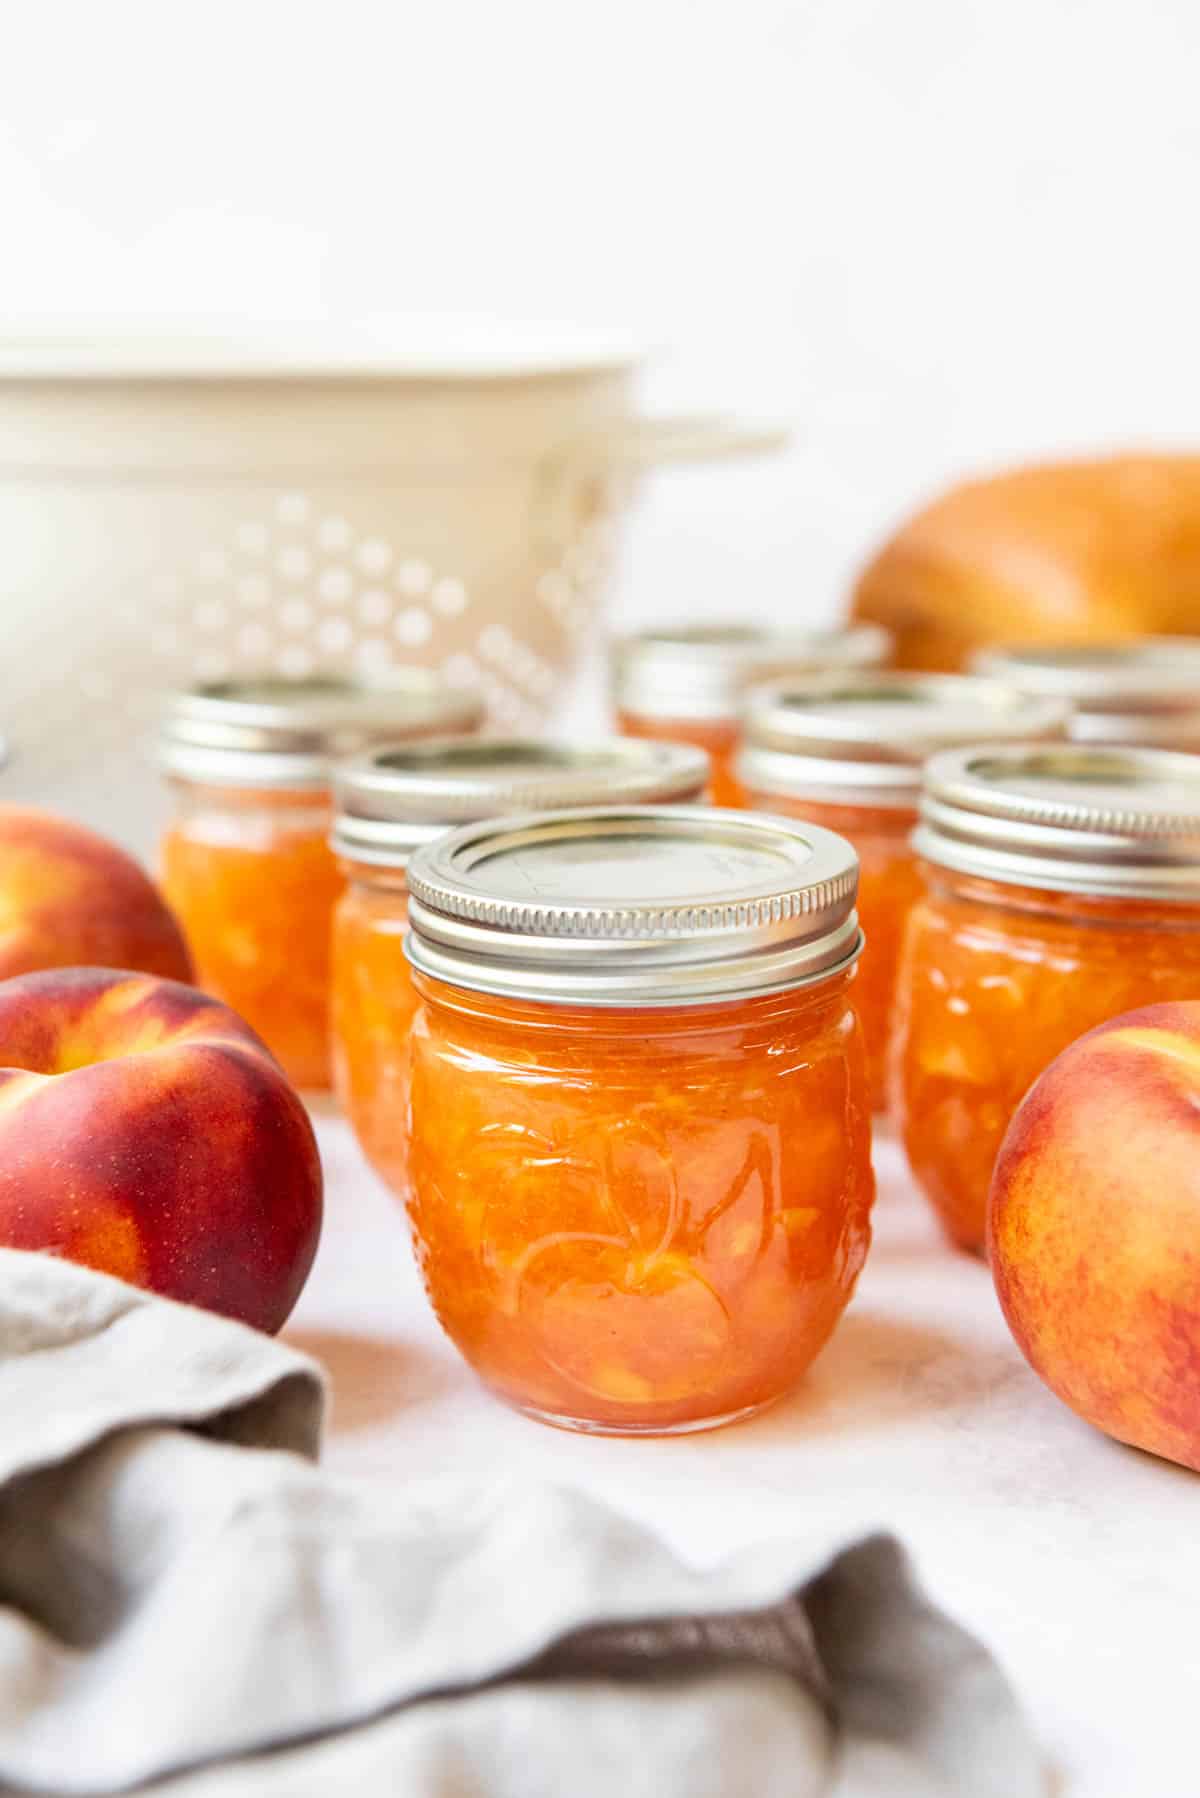 Jars of homemade peach jam in front of a white colander and fresh peaches.